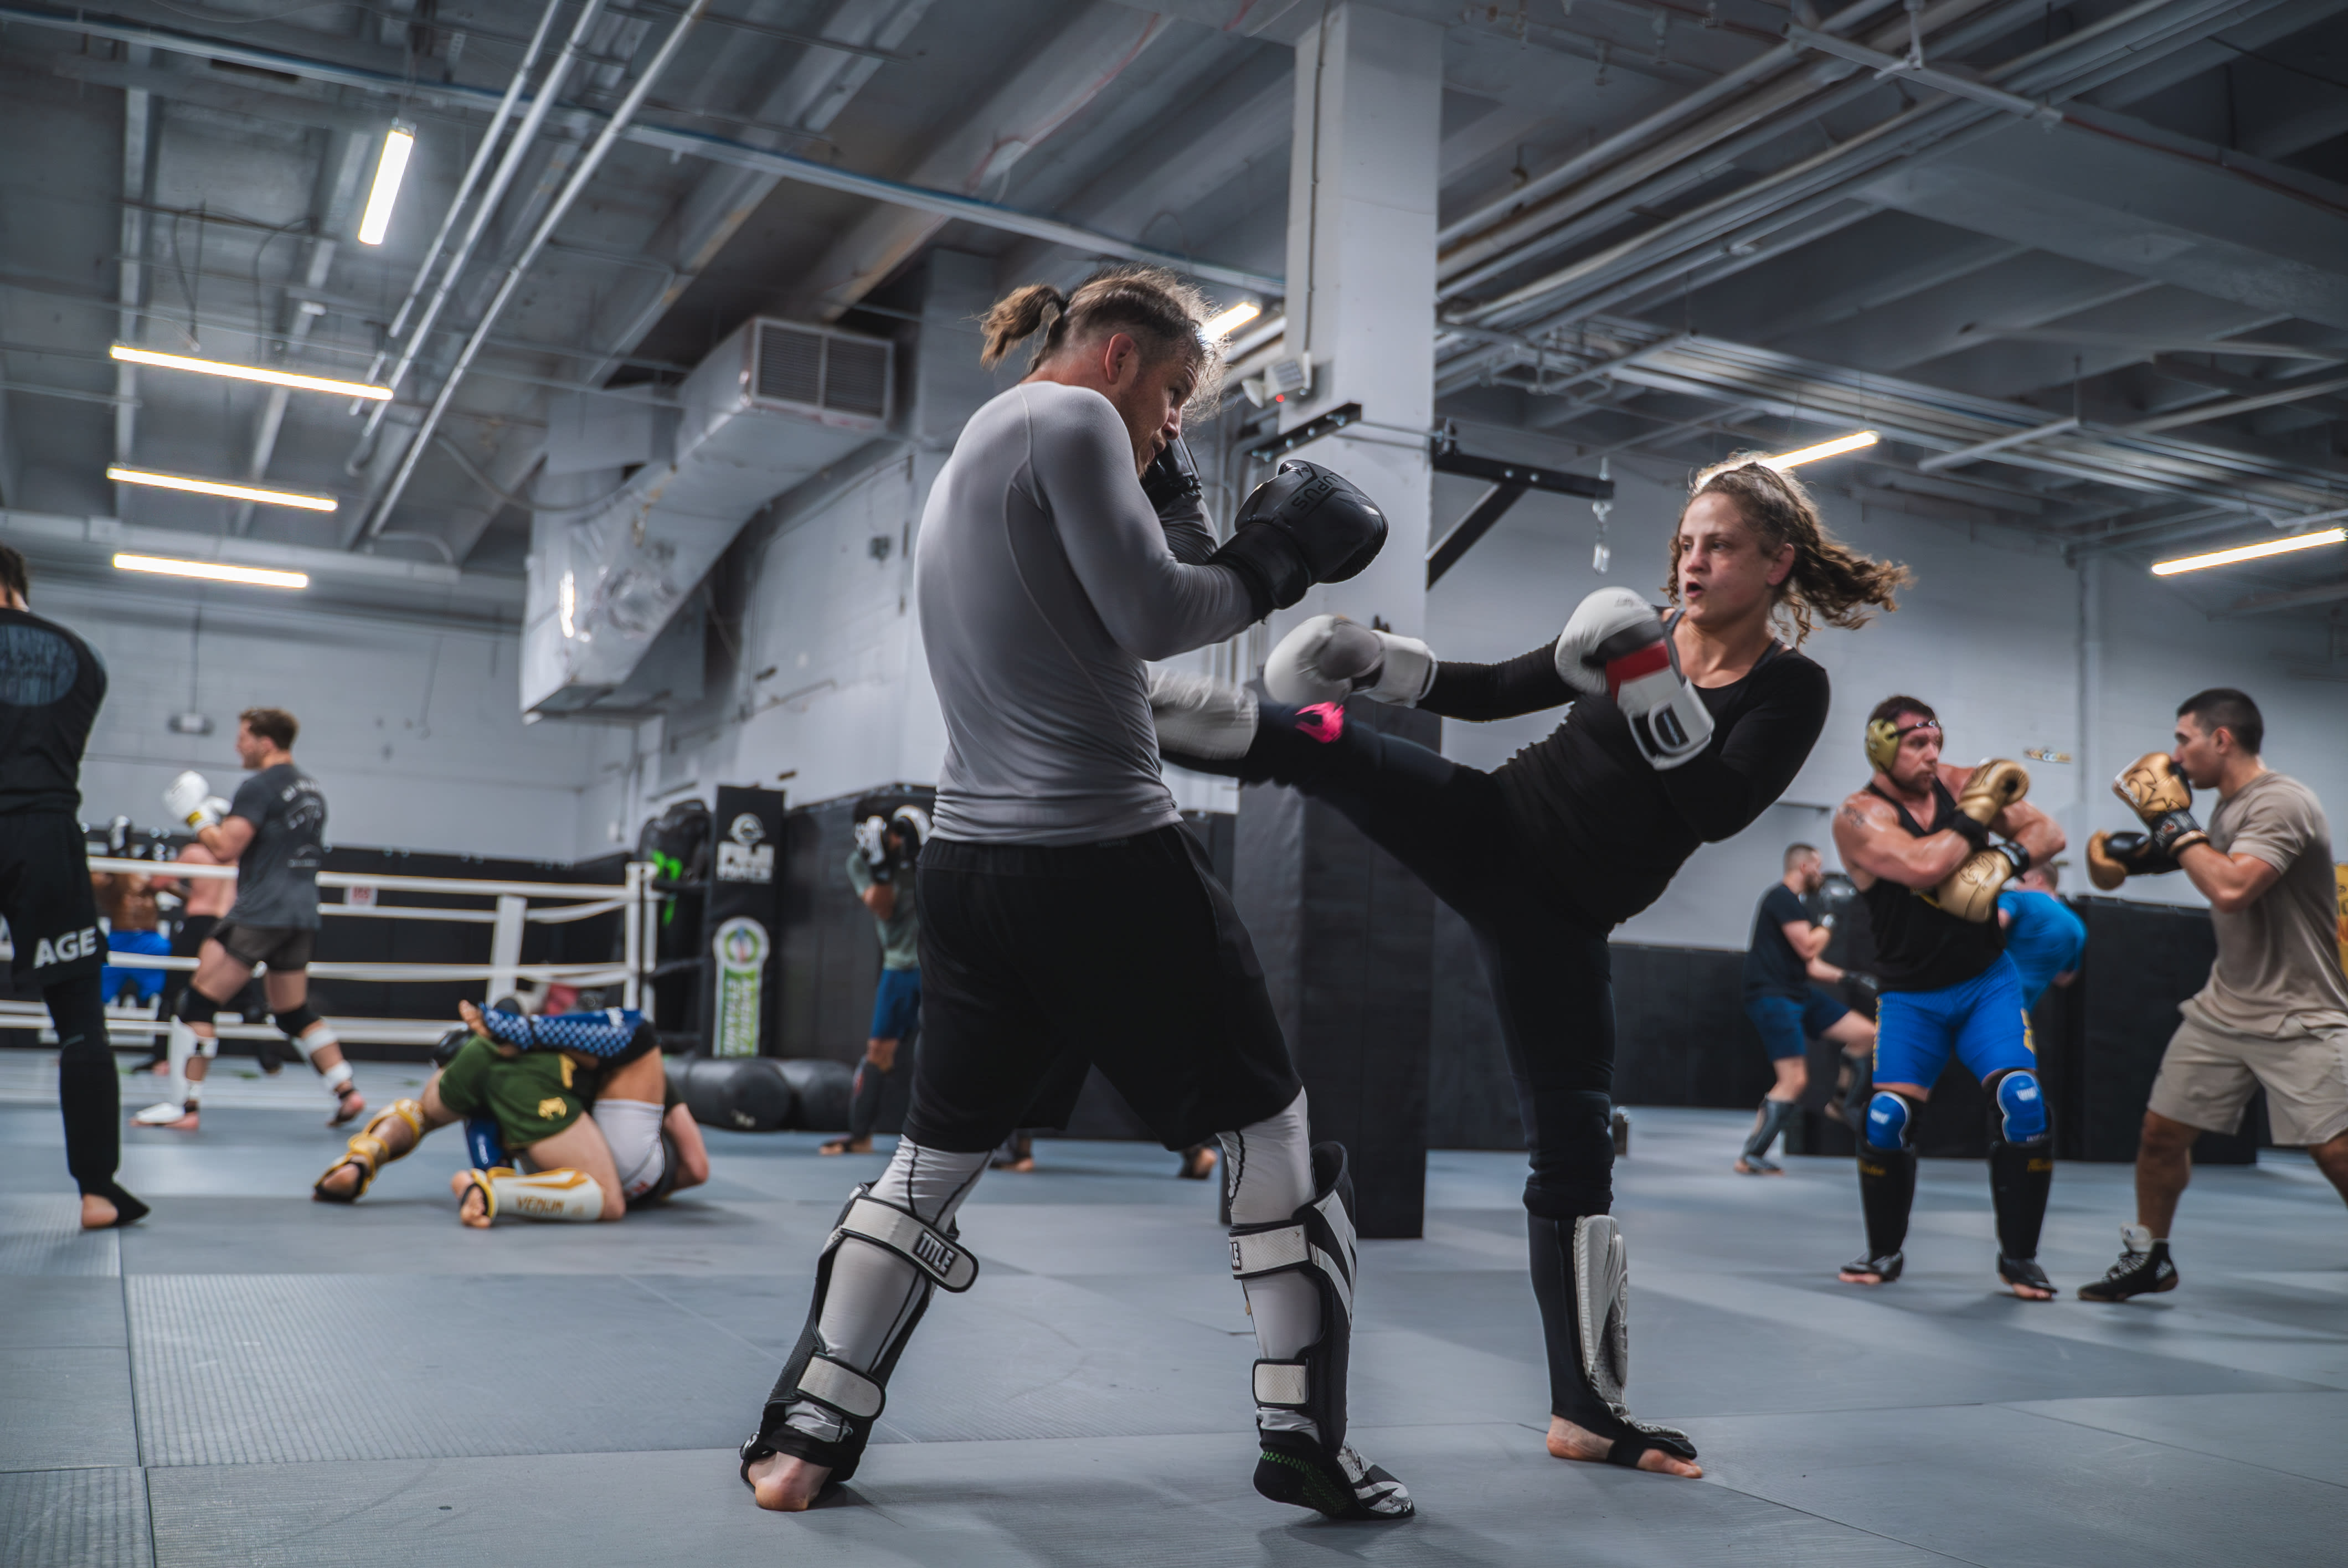 fitness exercise classes and martial arts in nashville